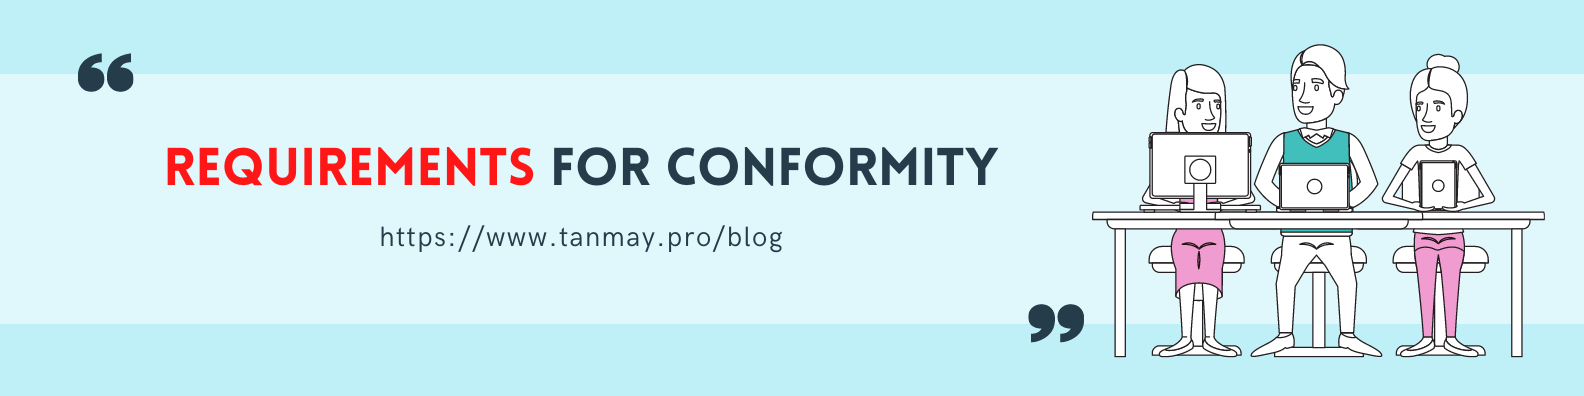 Requirements for Conformity